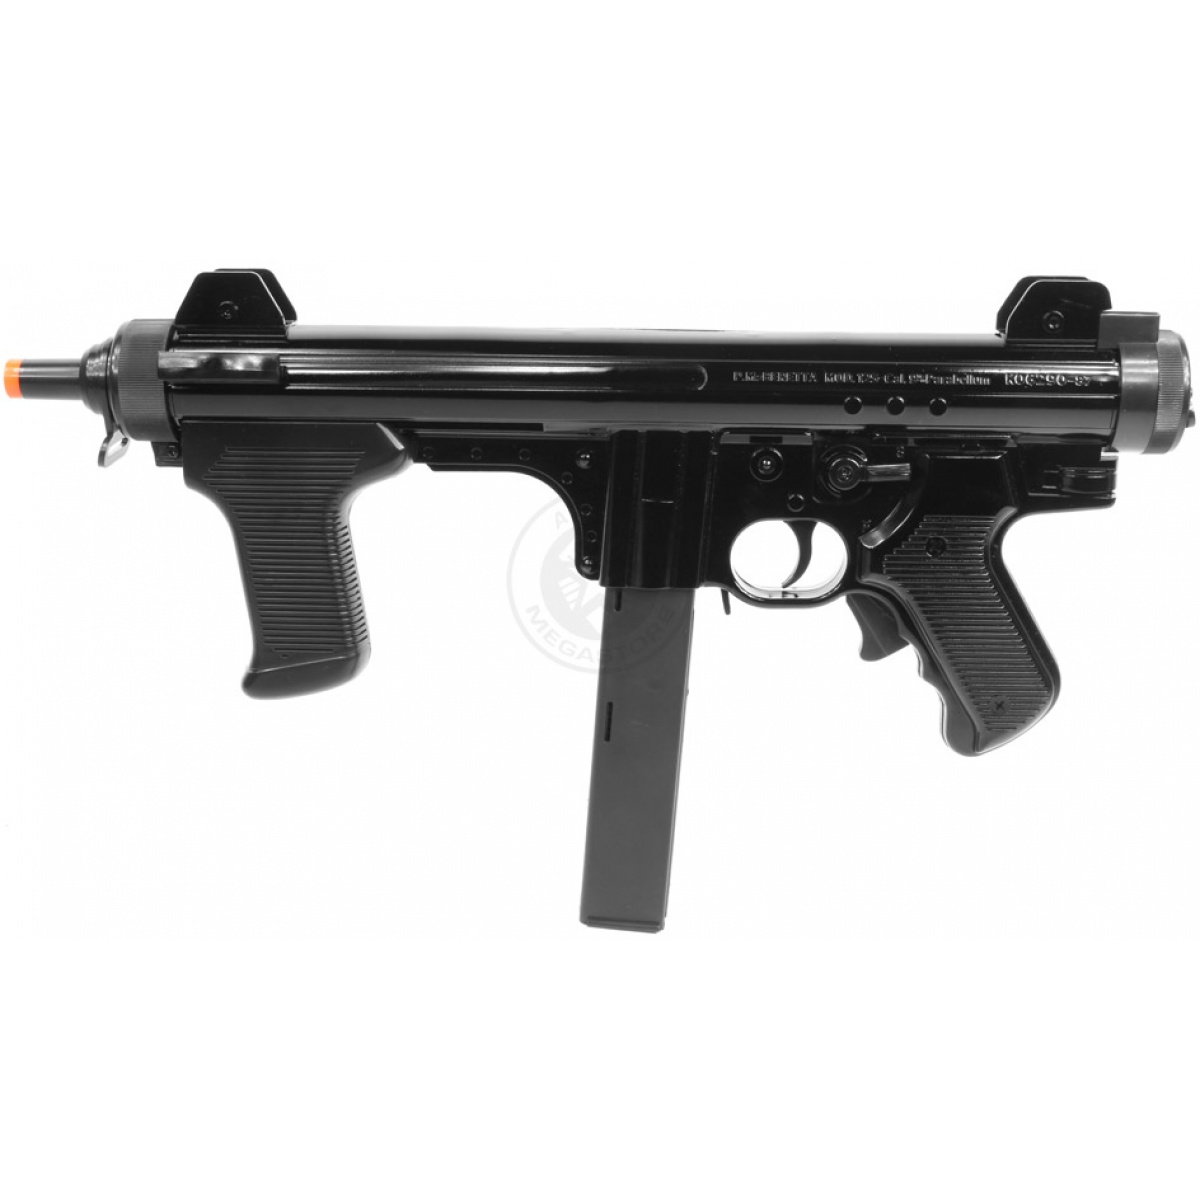 BERETTA PM12S Spring Powered Quality Reliable Pistol Grip AIRSOFT Rifle 